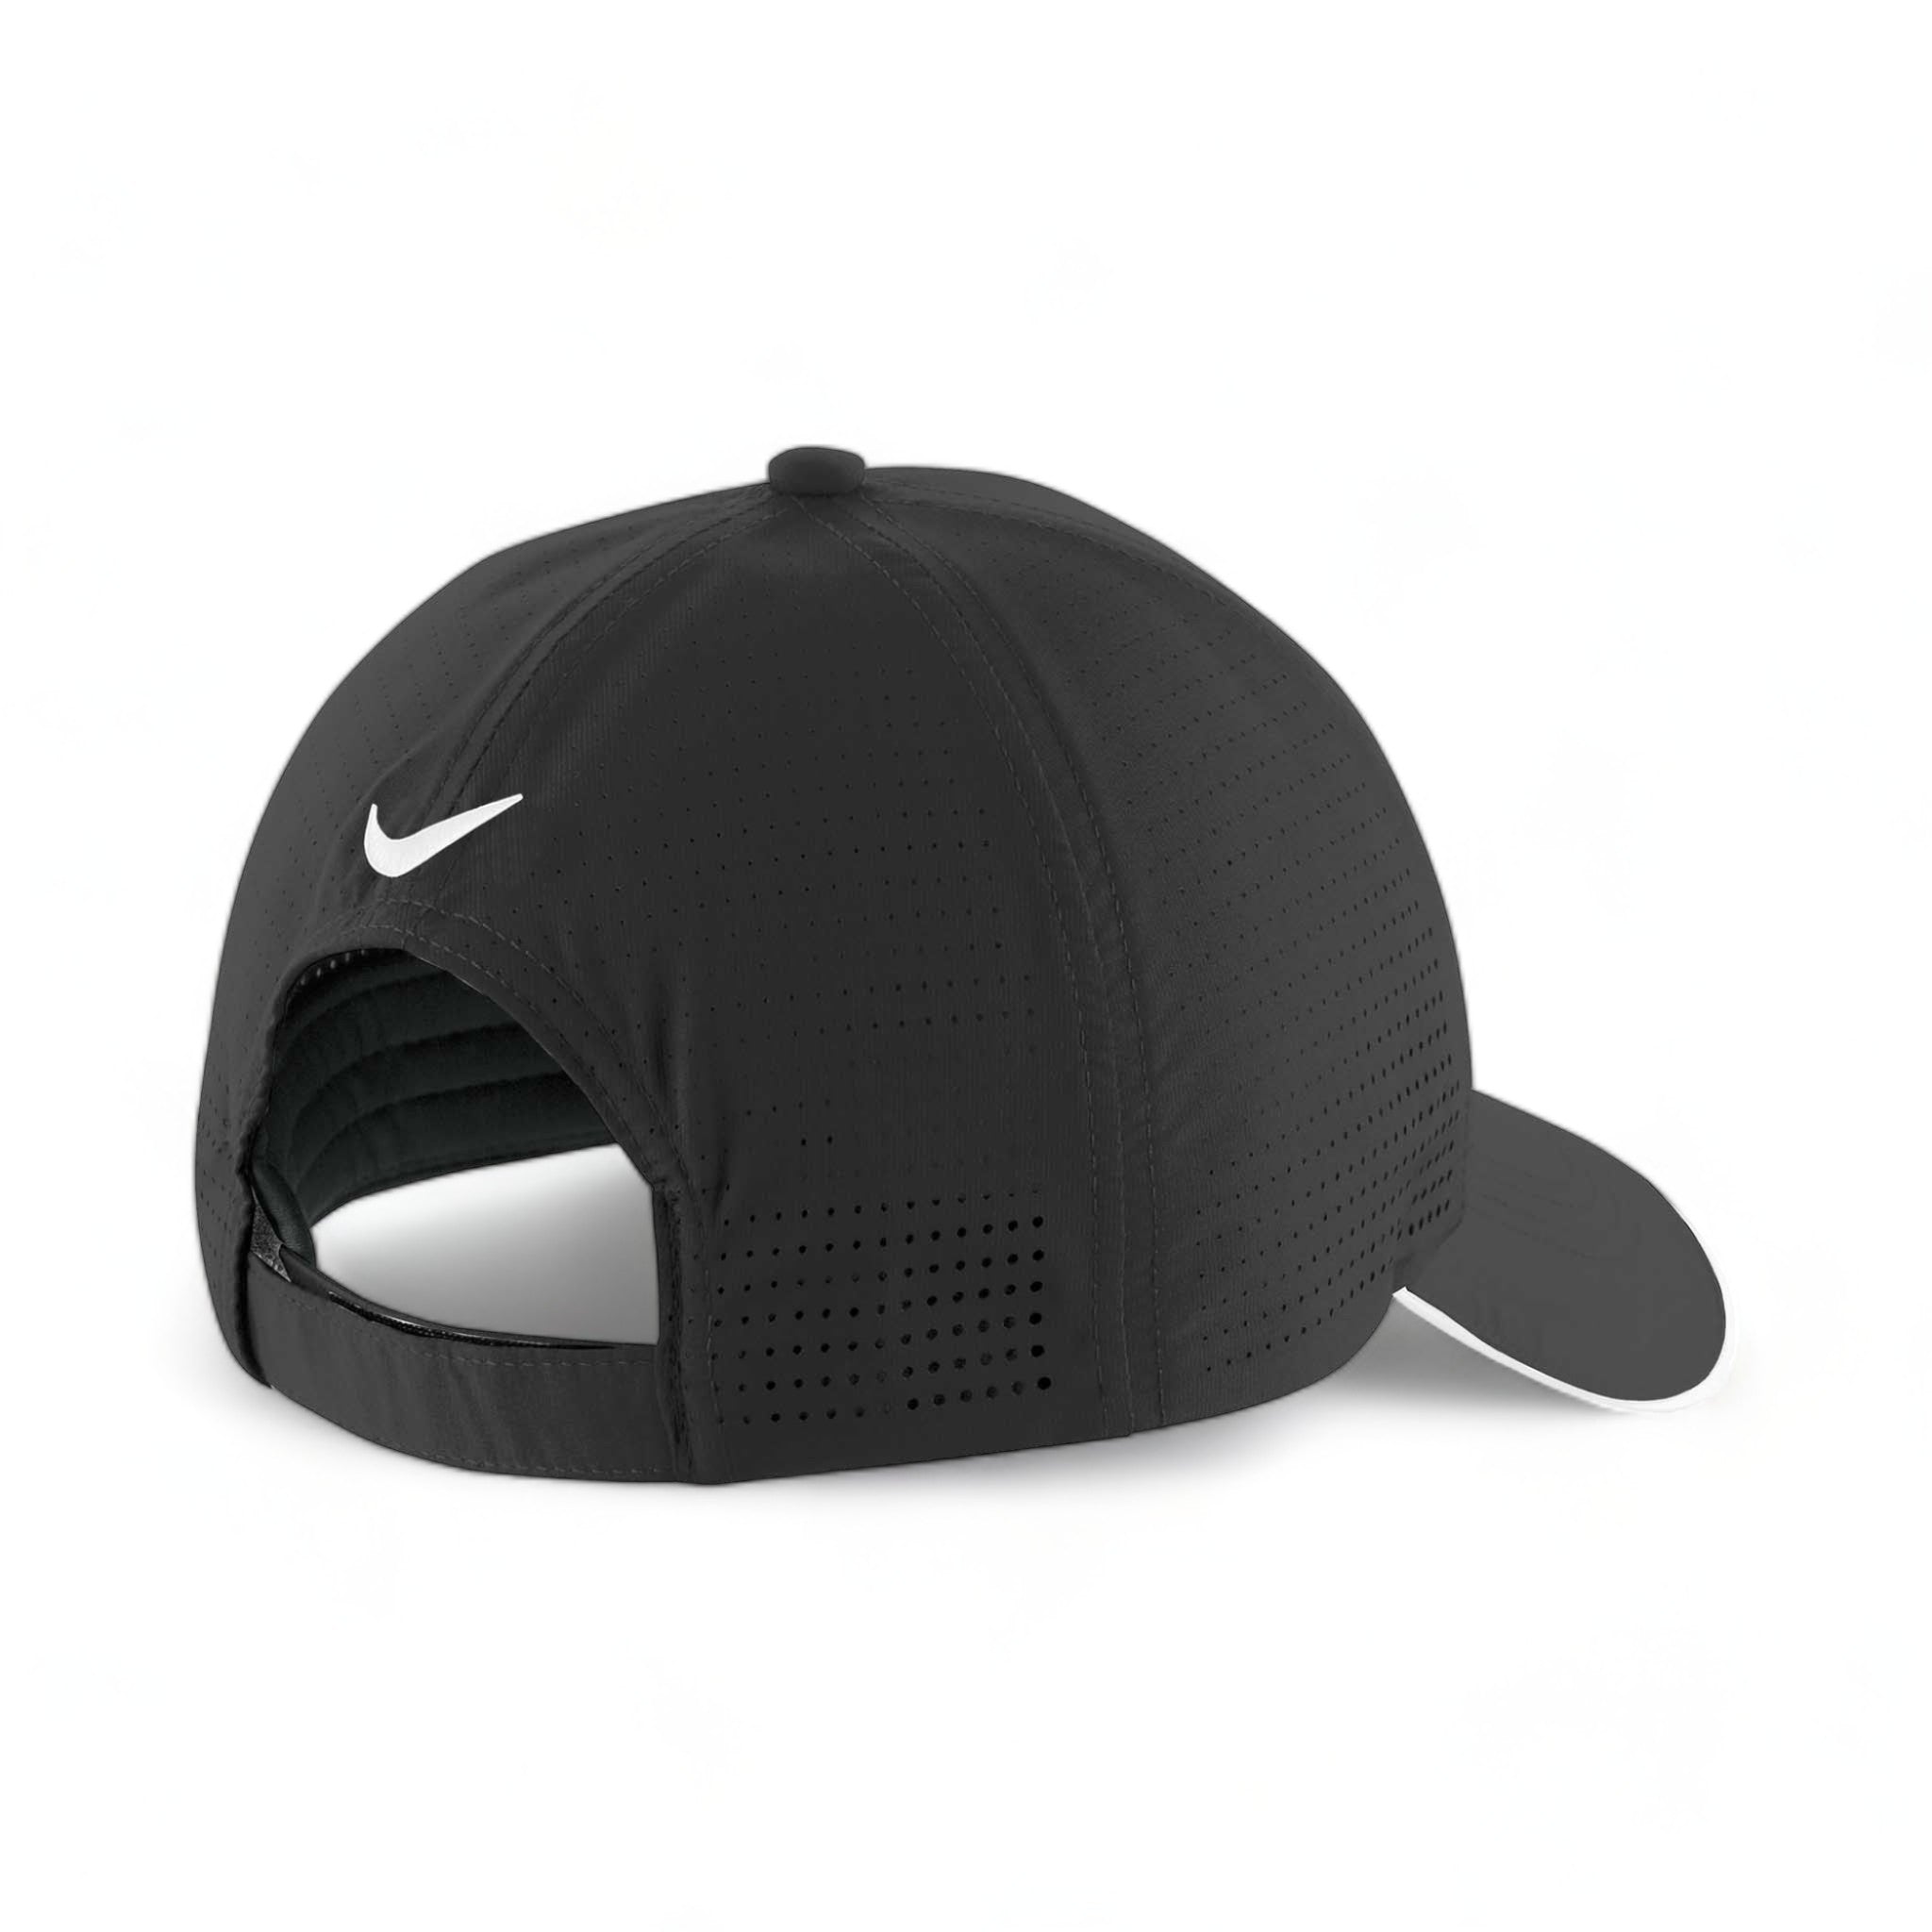 Back view of Nike NKFB6445 custom hat in anthracite and white